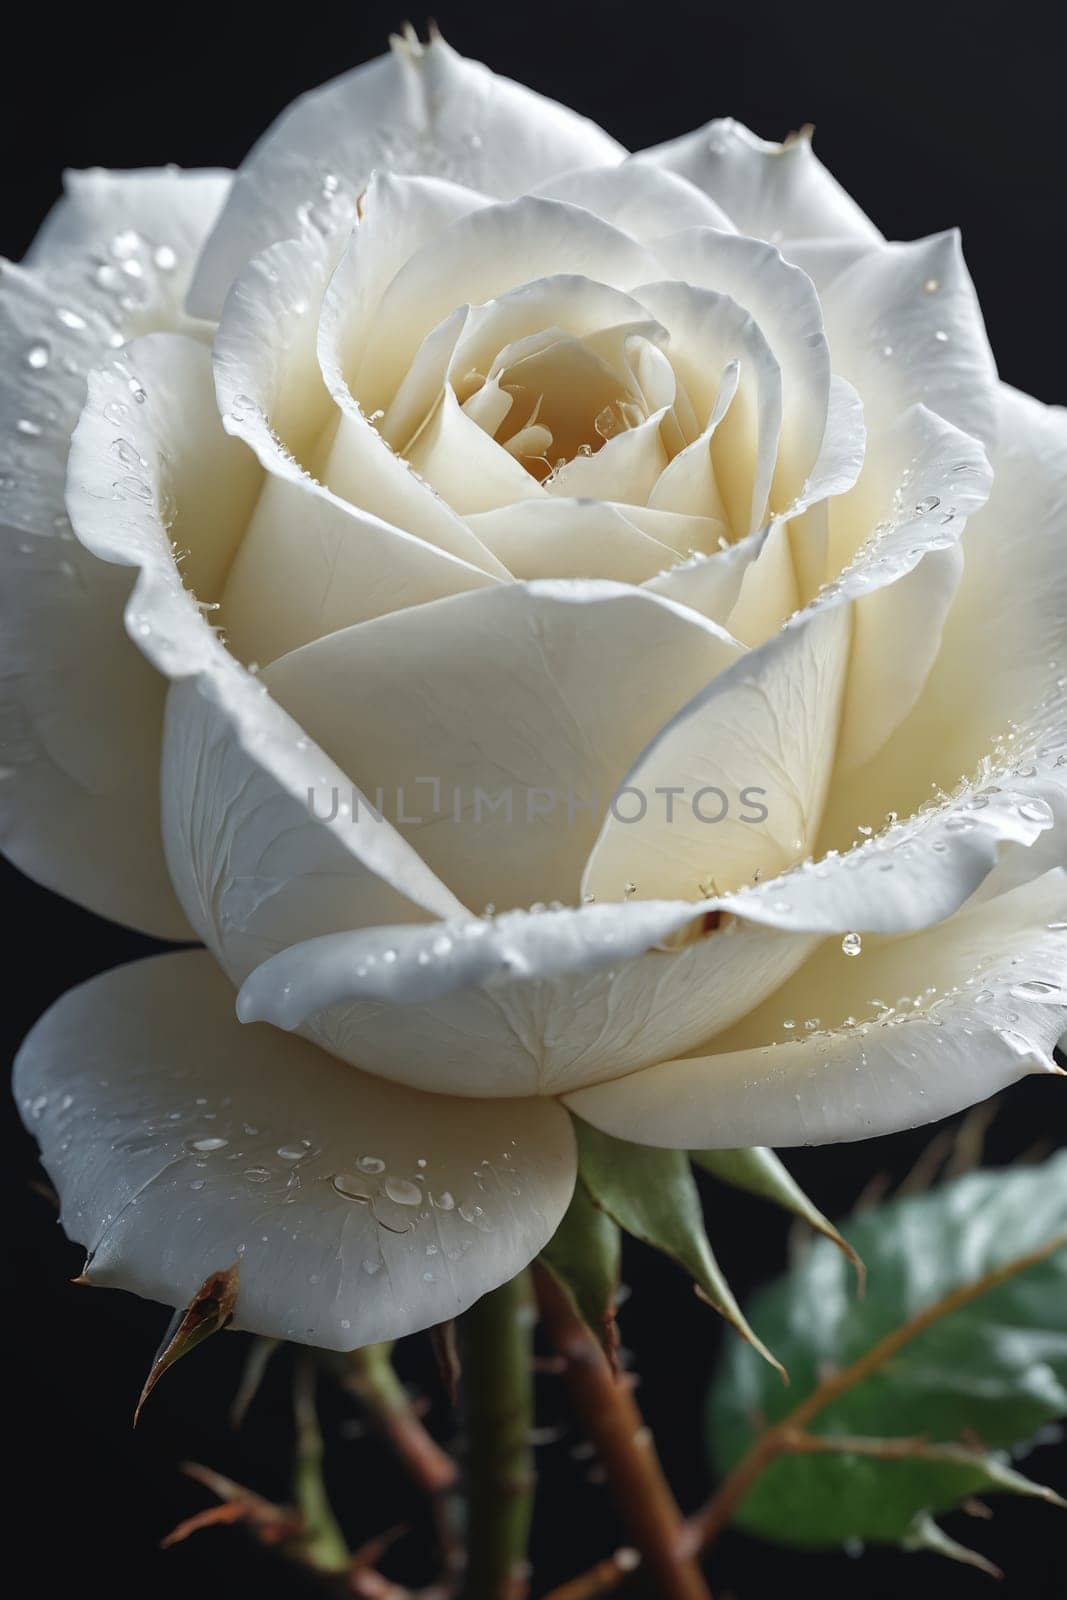 "Shimmering Solitude: Stunning Close-Up of a White Rose with Dew Drops" by Andre1ns